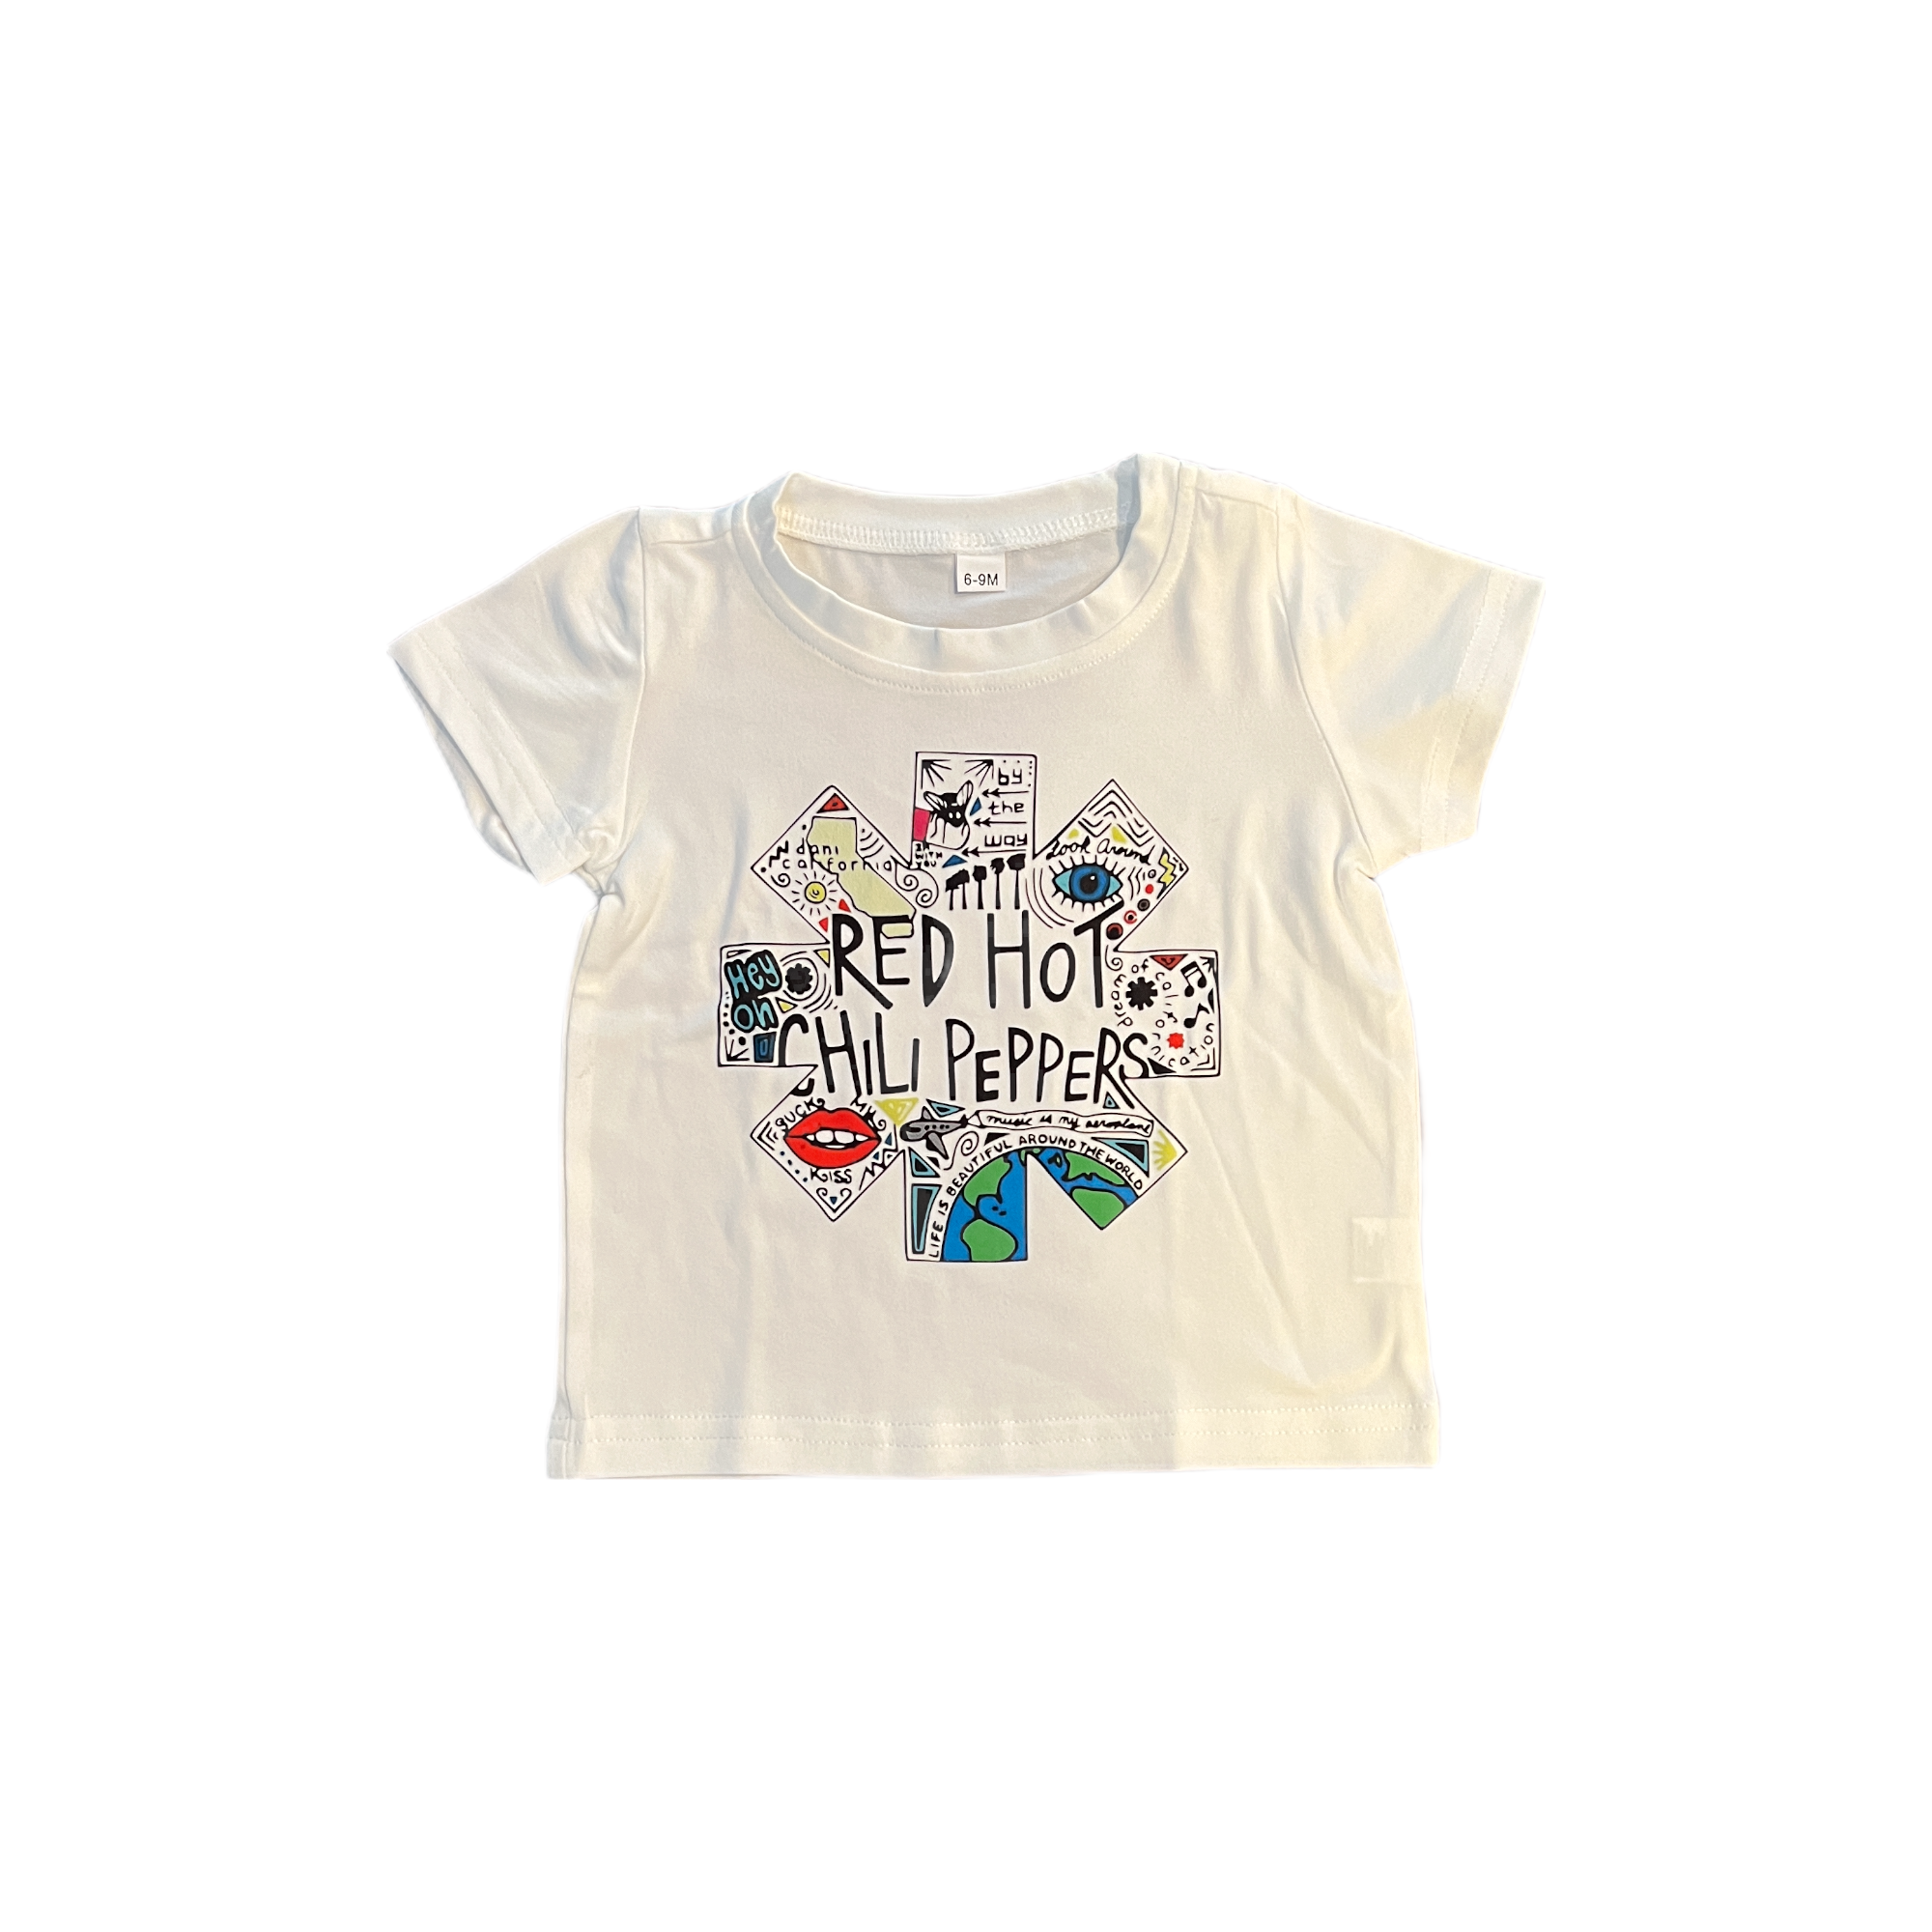 Red Hot Chili Peppers Tee - Twinkle Twinkle Little One